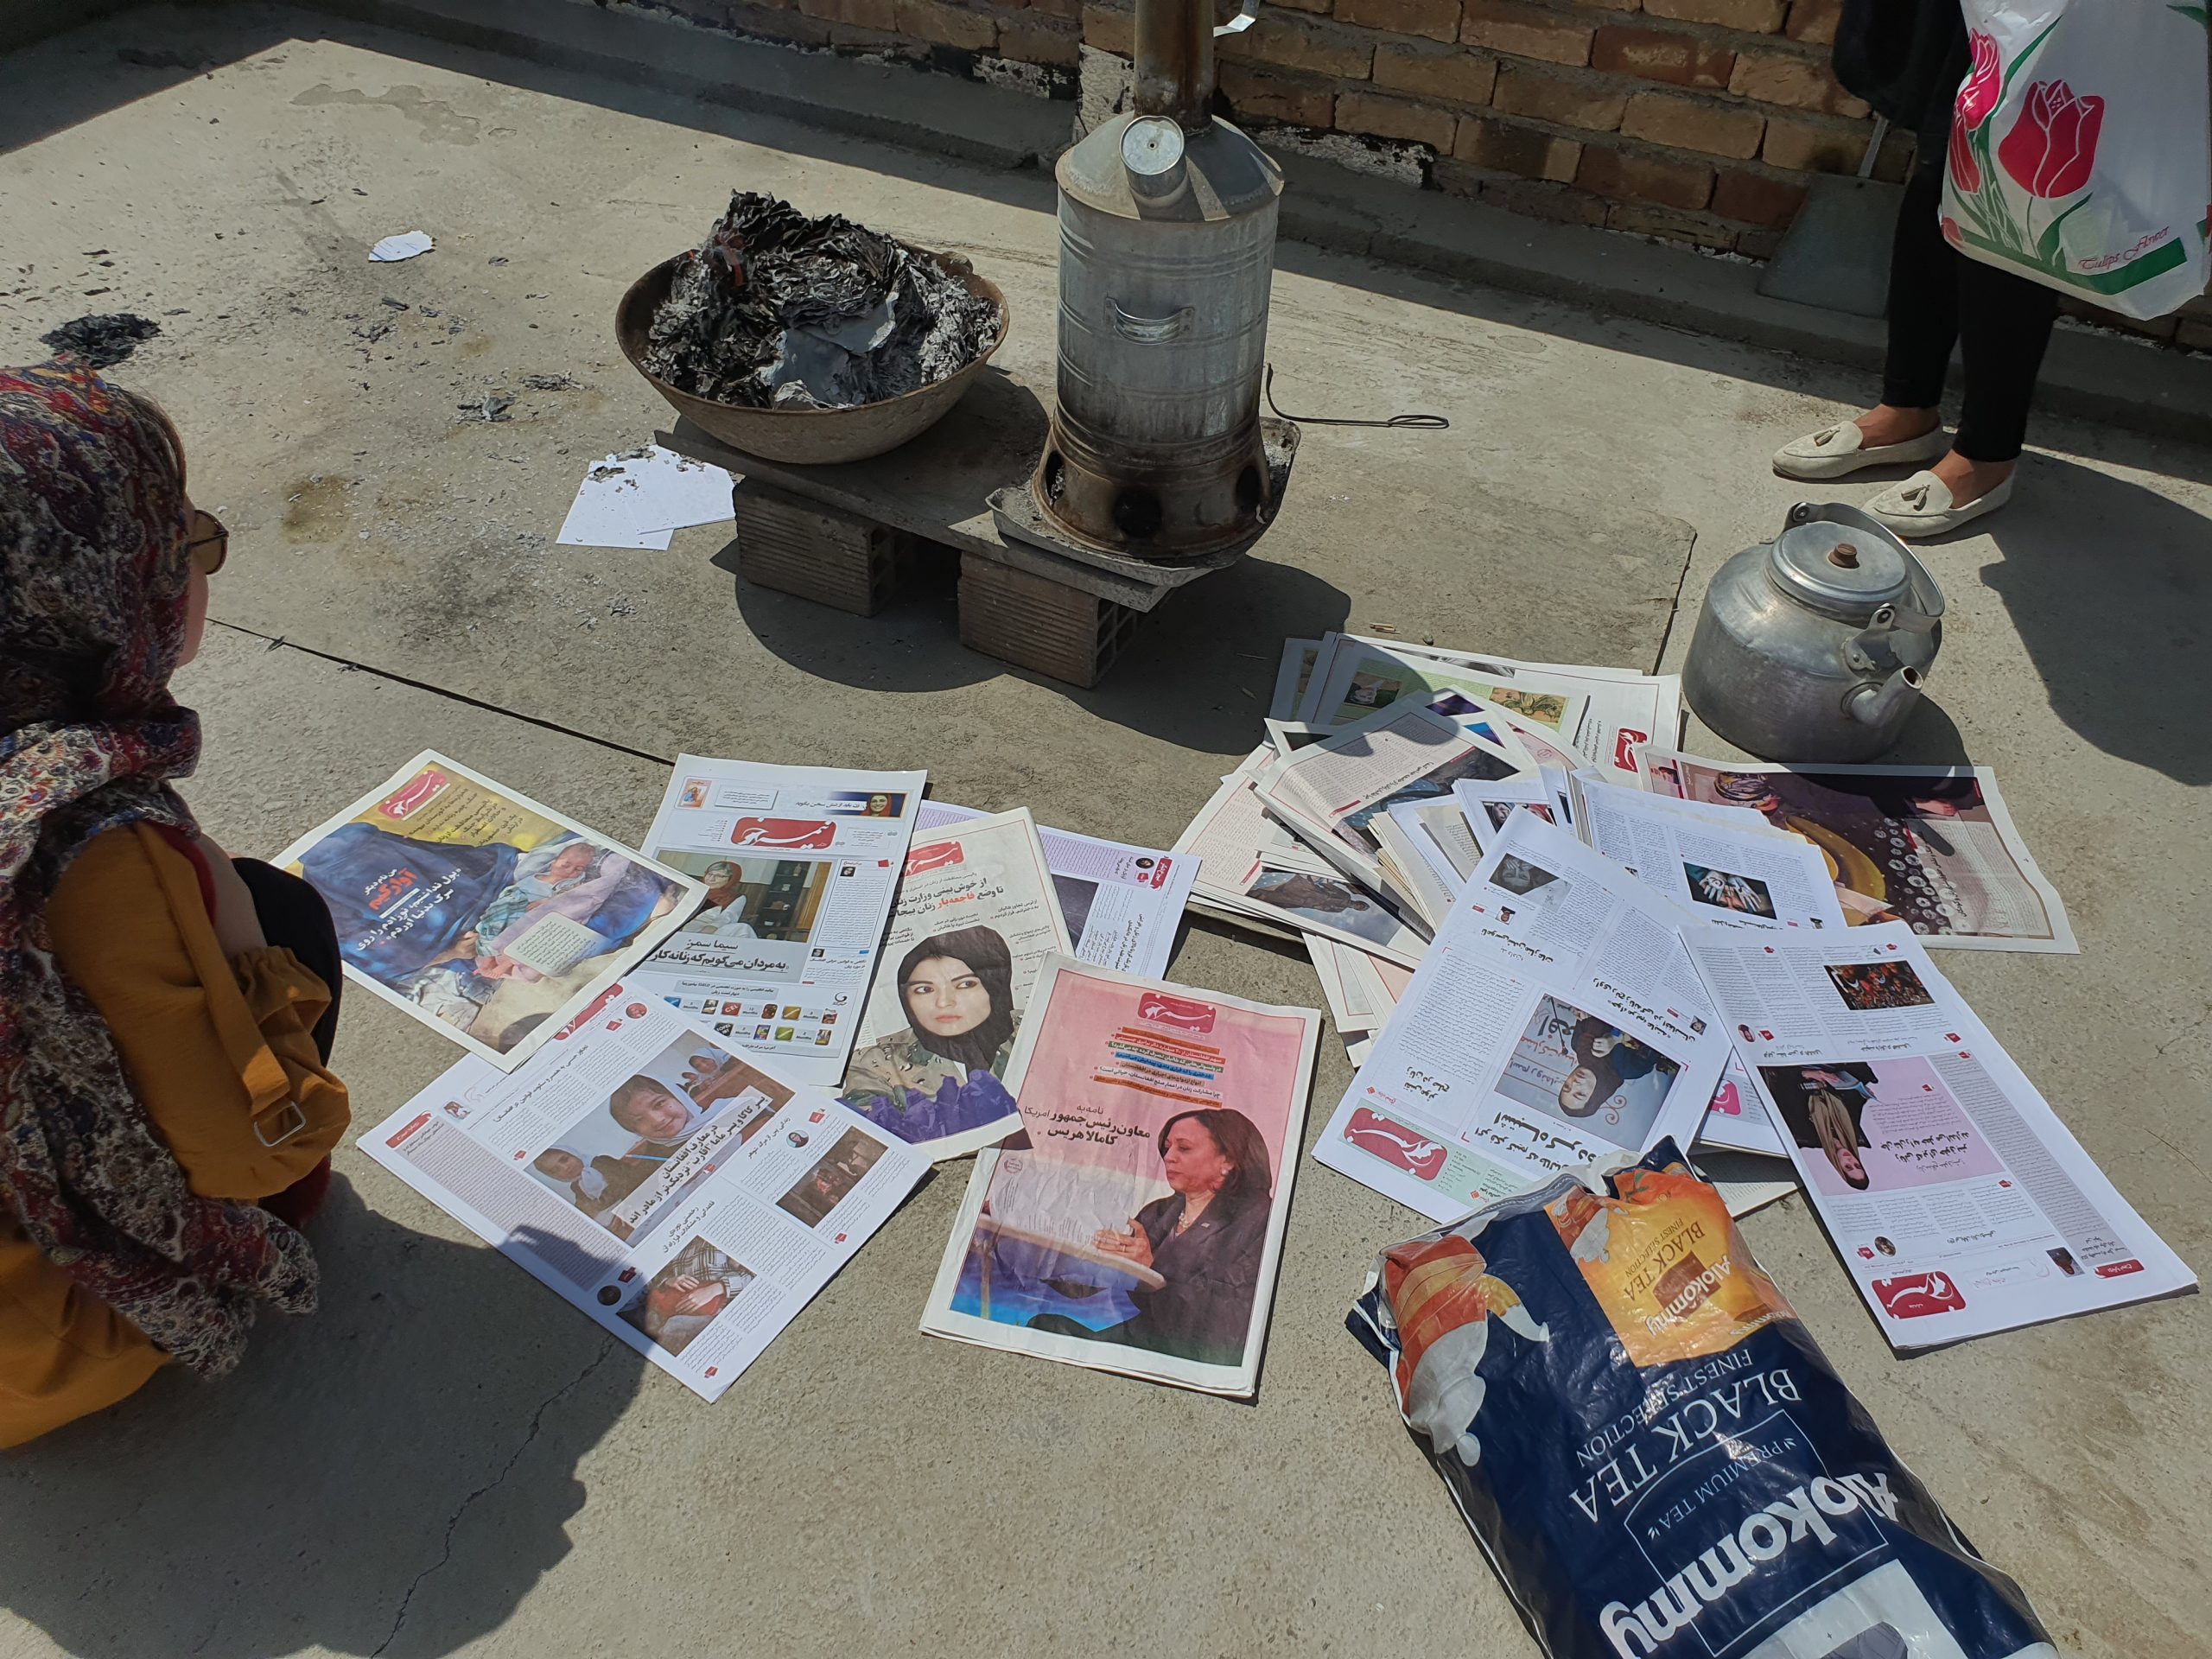 Newspapers of Nimrokh Media are scattered on the ground after several documents had been burned in Afghanistan